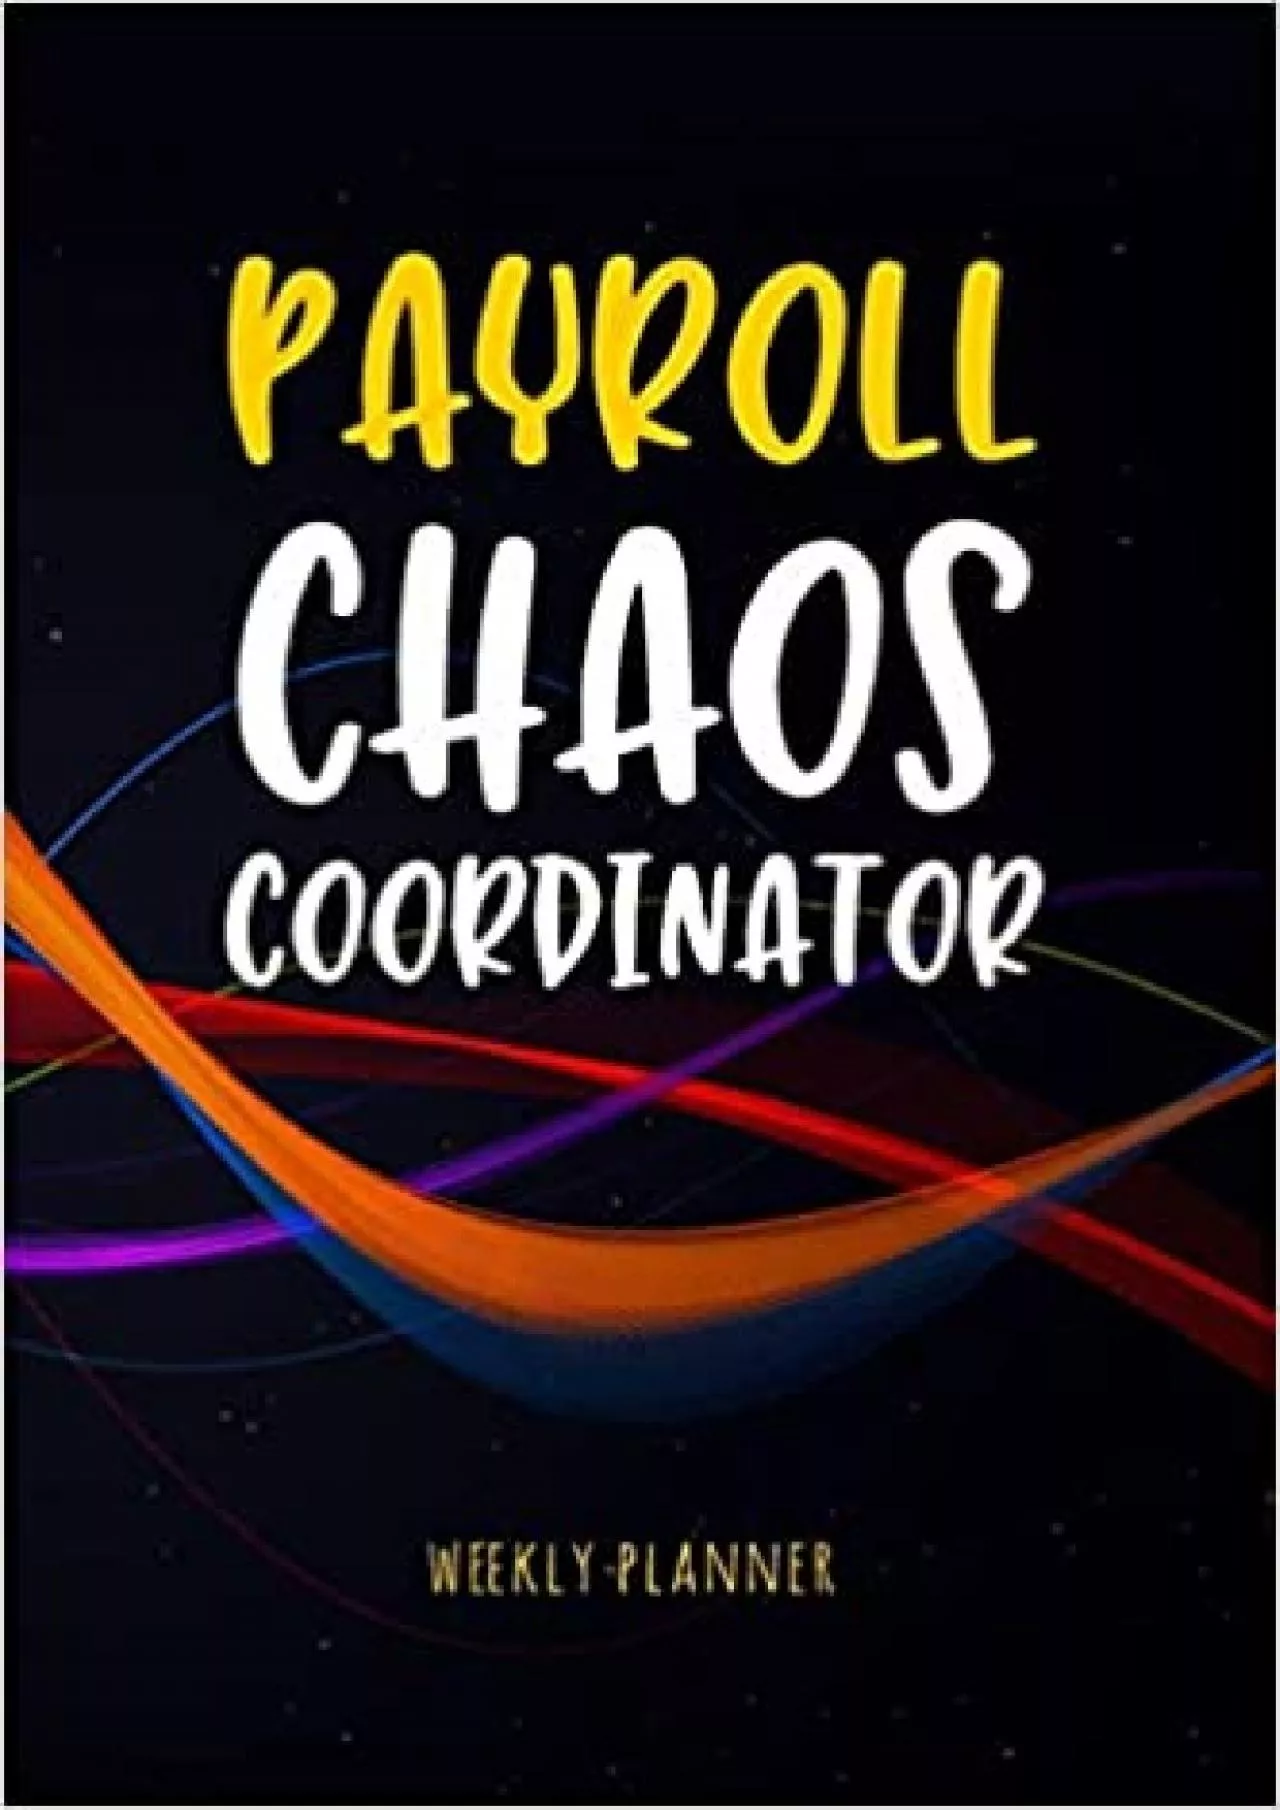 Payroll Chaos Coordinator - Weekly Planner: Workplace Humor Notebook Funny Quote Journal